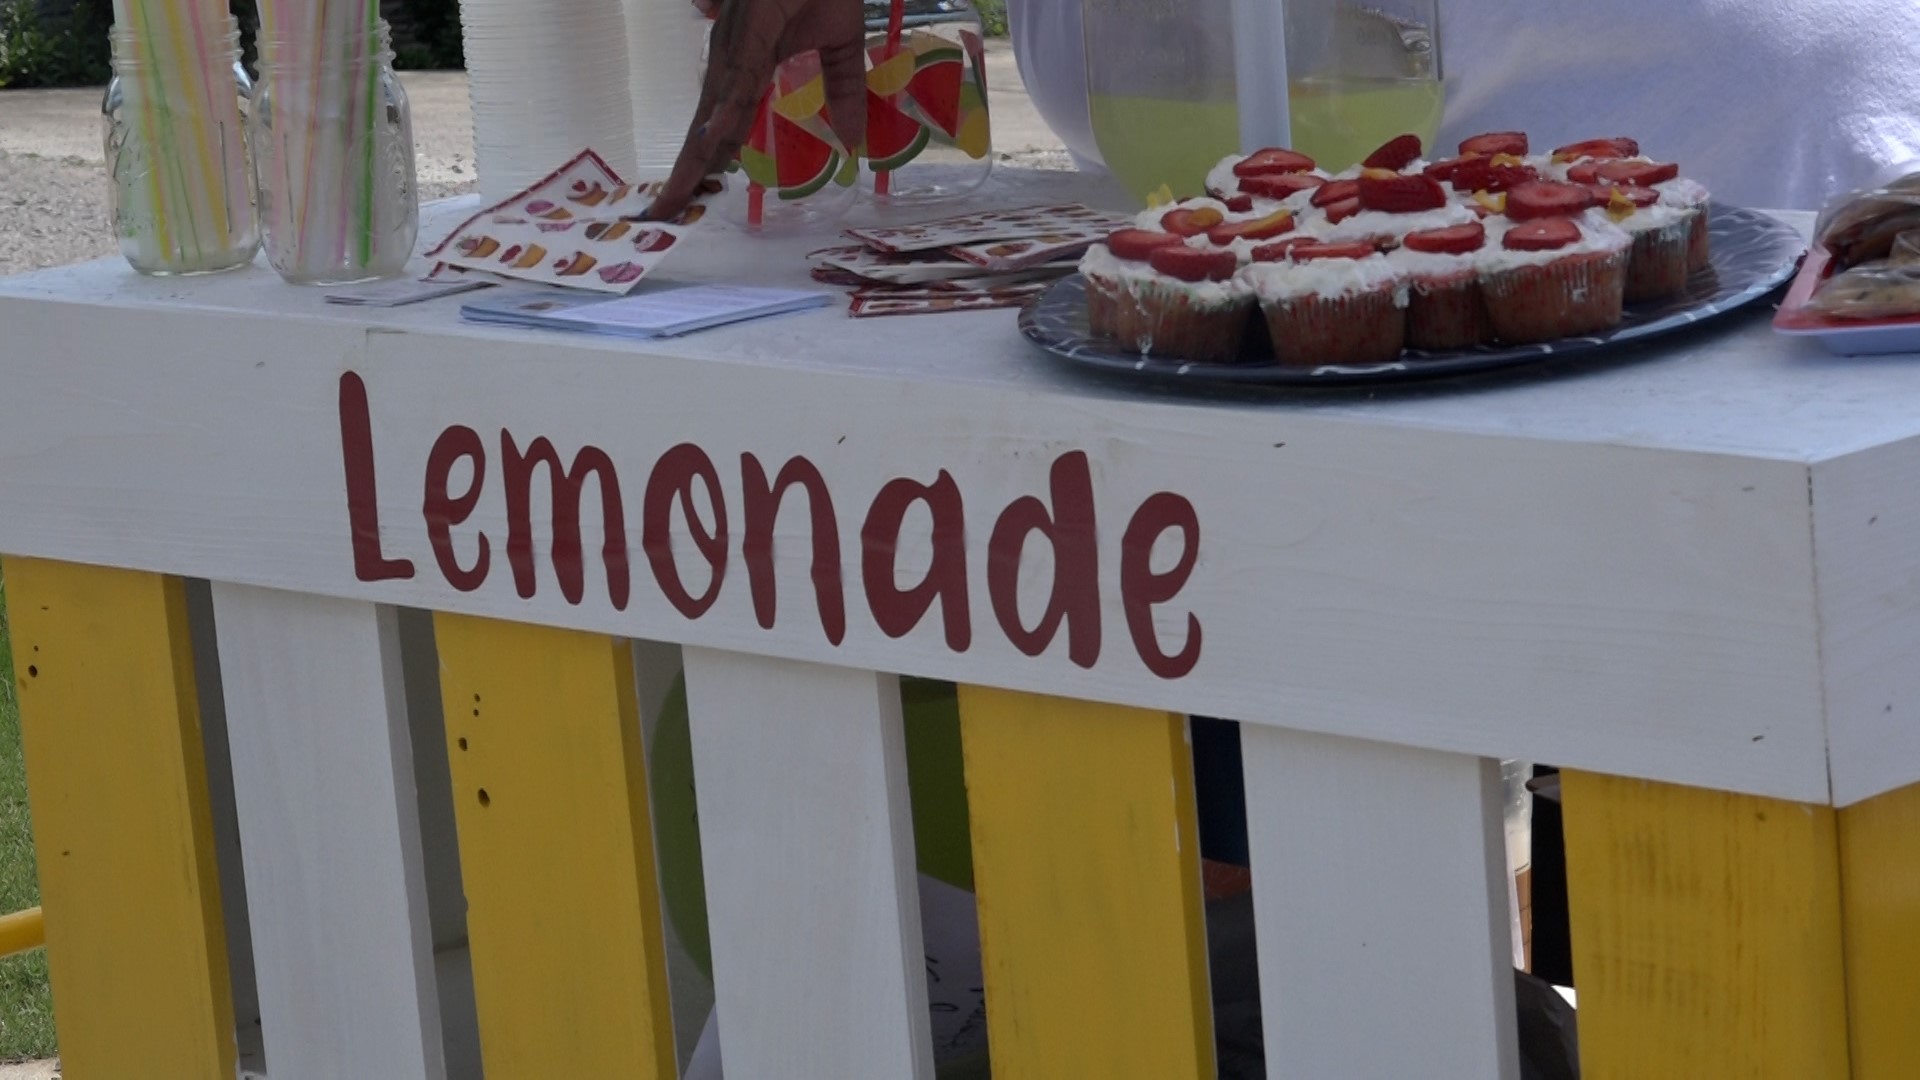 Special needs group home holds lemonade stand to raise money for the organization.